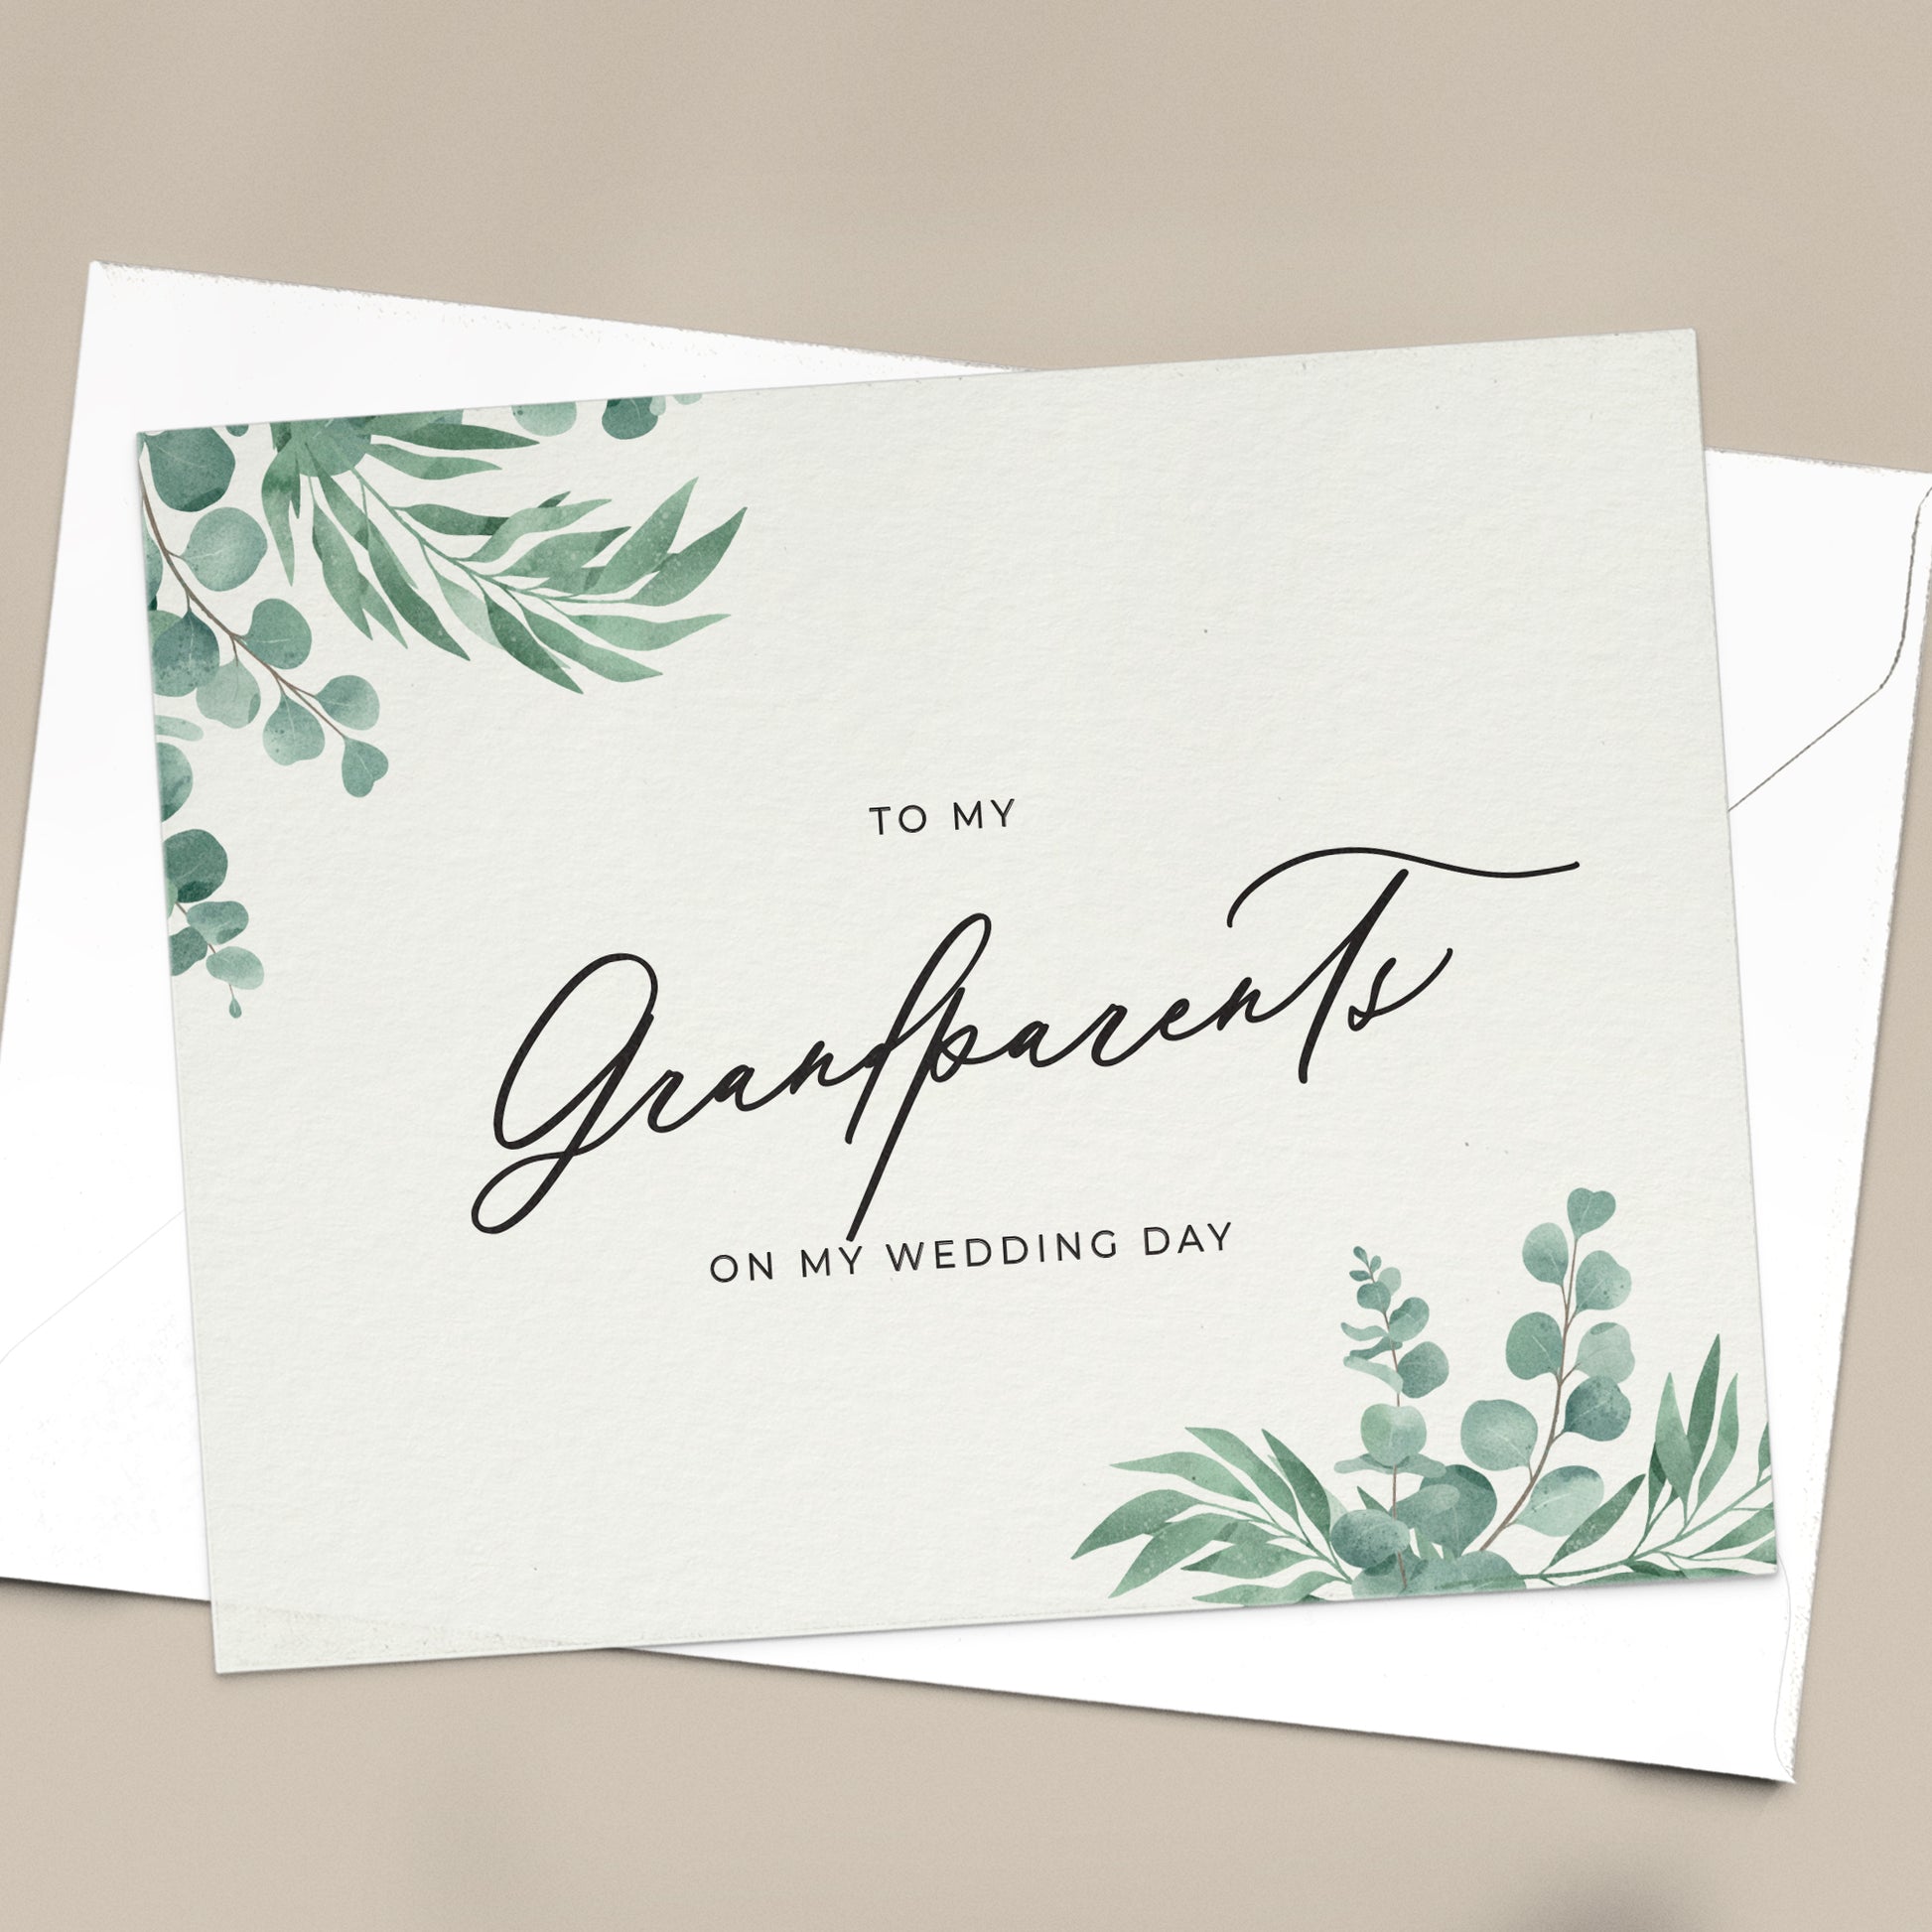 To my grandparents on my wedding day note card in greenery design with eucalyptus leaves and calligraphy font from XOXOKristen.